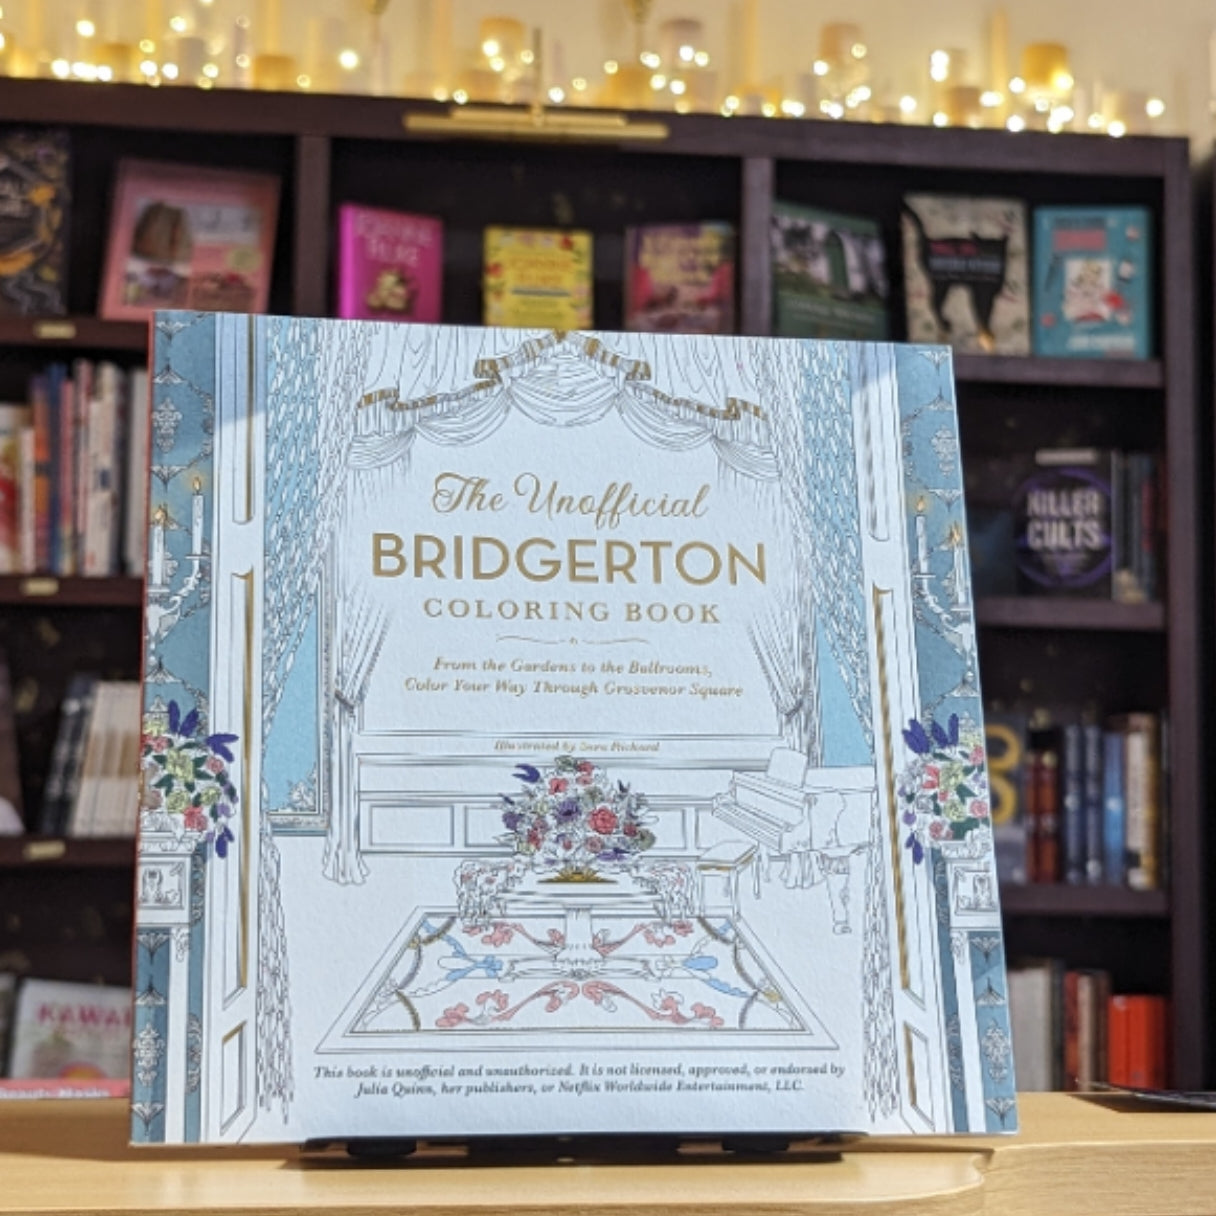 The Unofficial Bridgerton Coloring Book: From the Gardens to the Ballrooms, Color Your Way Through Grosvenor Square (Unofficial Coloring Book)